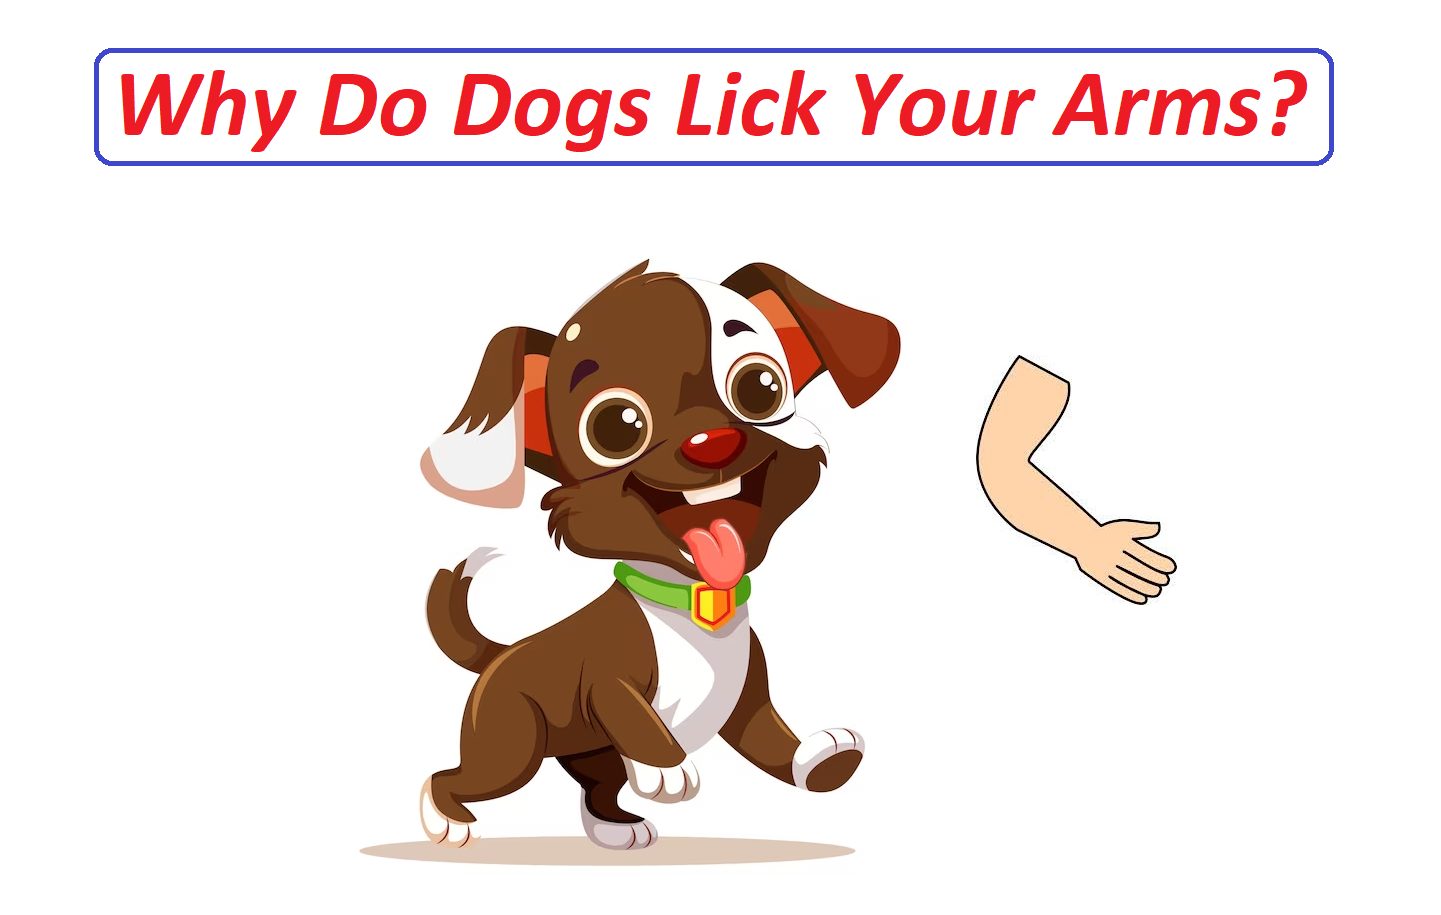 Why Do Dogs Lick Your Arms?